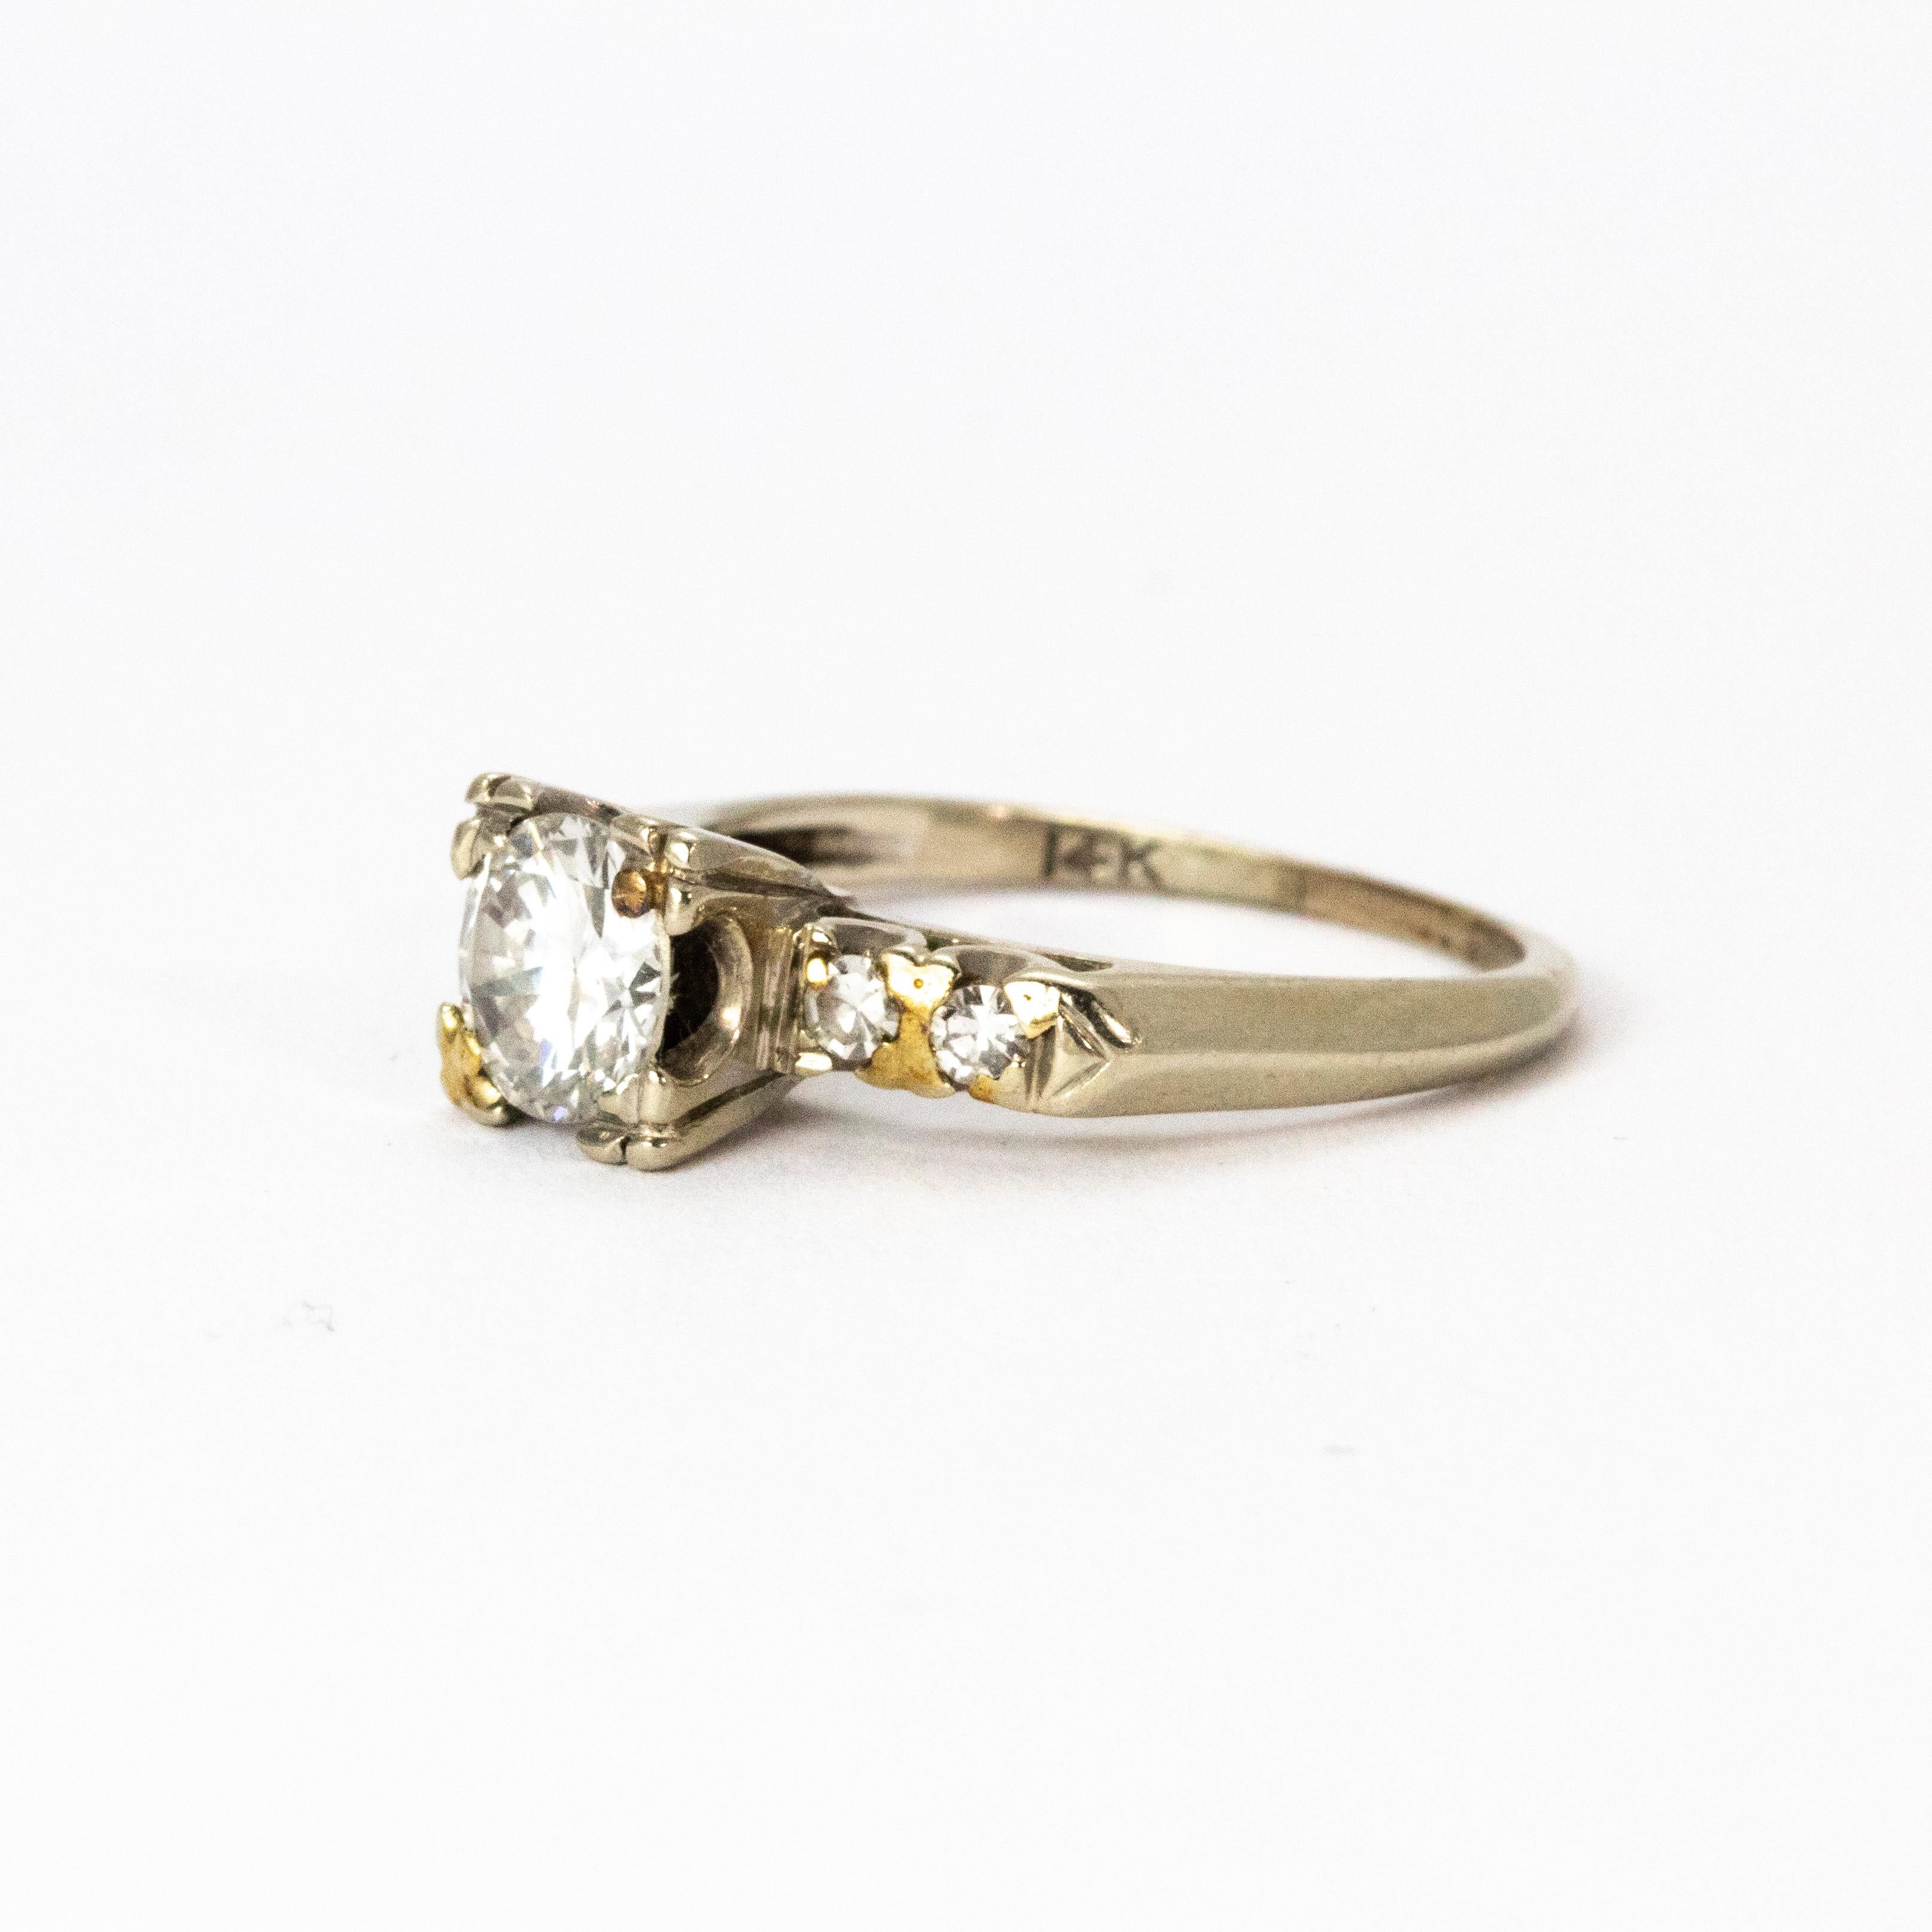 A stunning diamond solitaire ring from the Edwardian era circa 1901. The beautiful central old European cut diamond measures 80 points , H colour and VS2 clarity. The shoulders are each set with a pair of diamonds, all modelled in 14 karat white